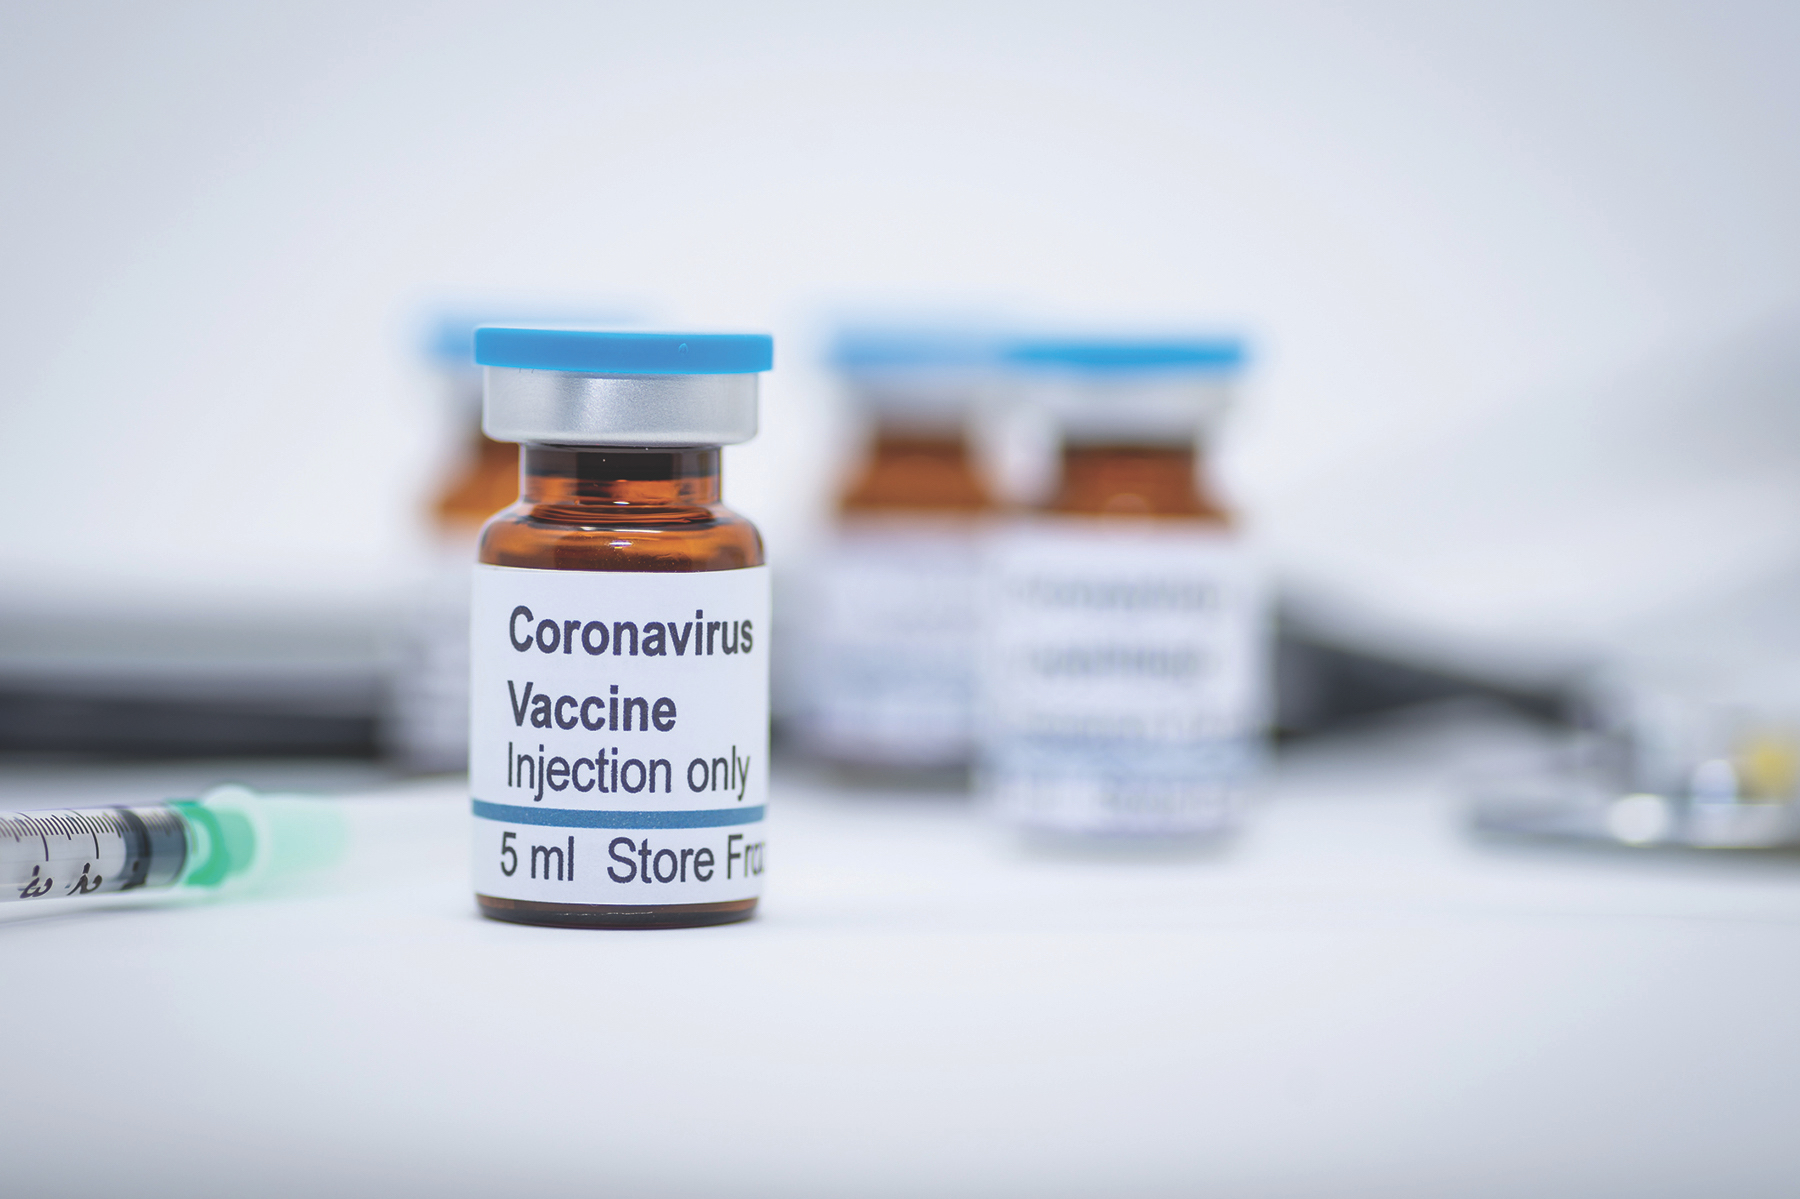 NEWS | Public Health England confirms priority list for COVID-19 vaccine